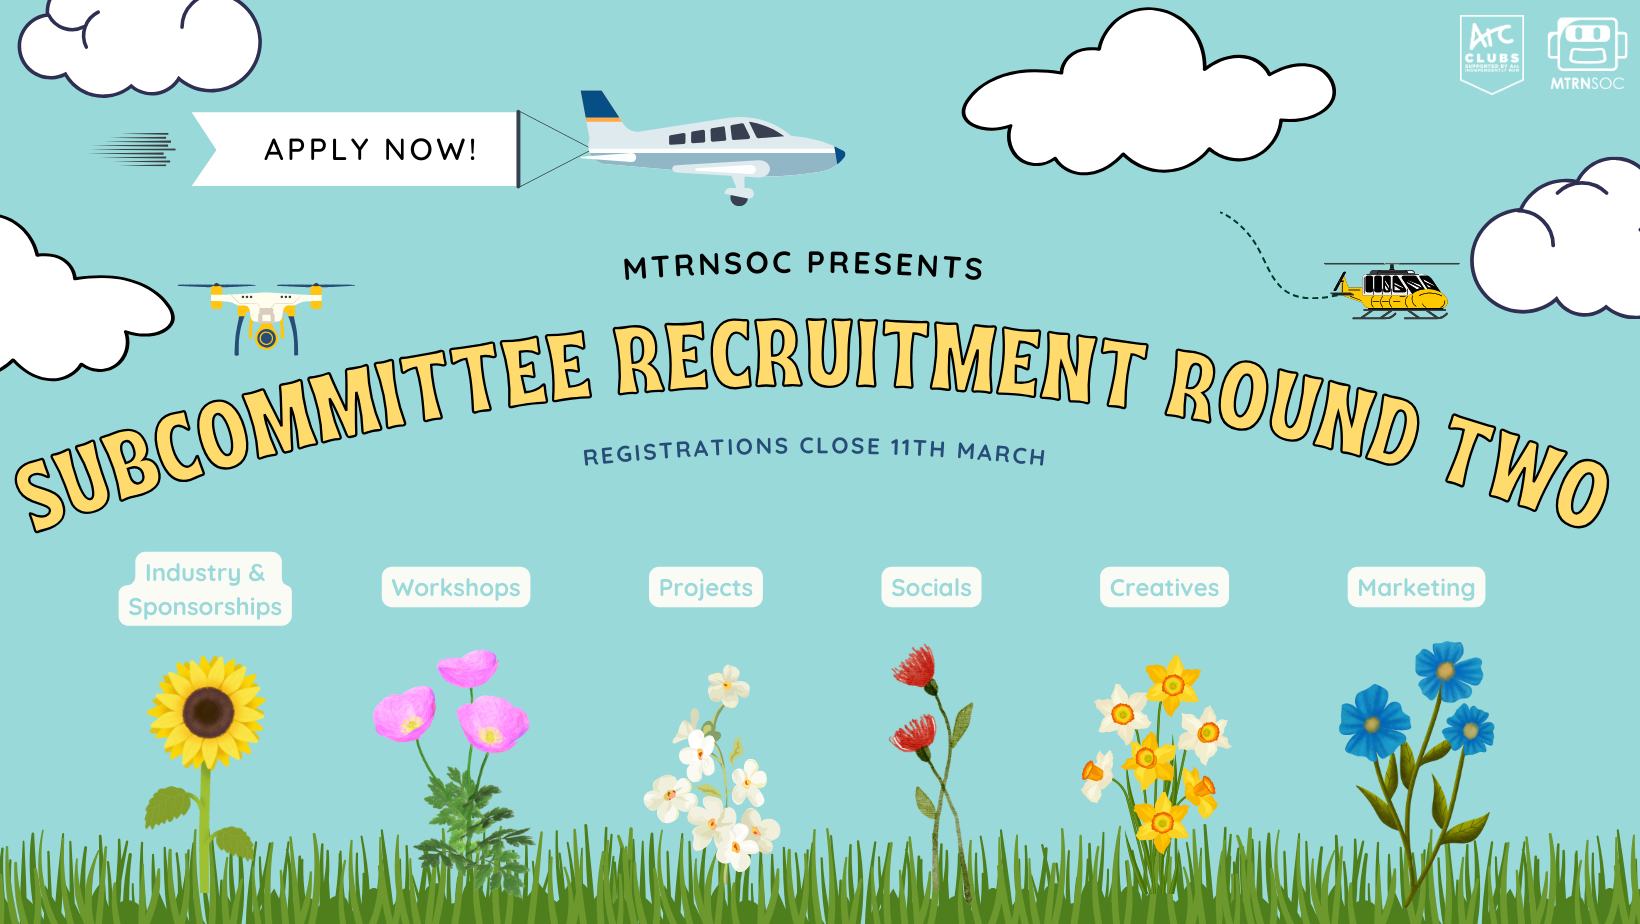 Subcommittee Recruitment Round Two  banner